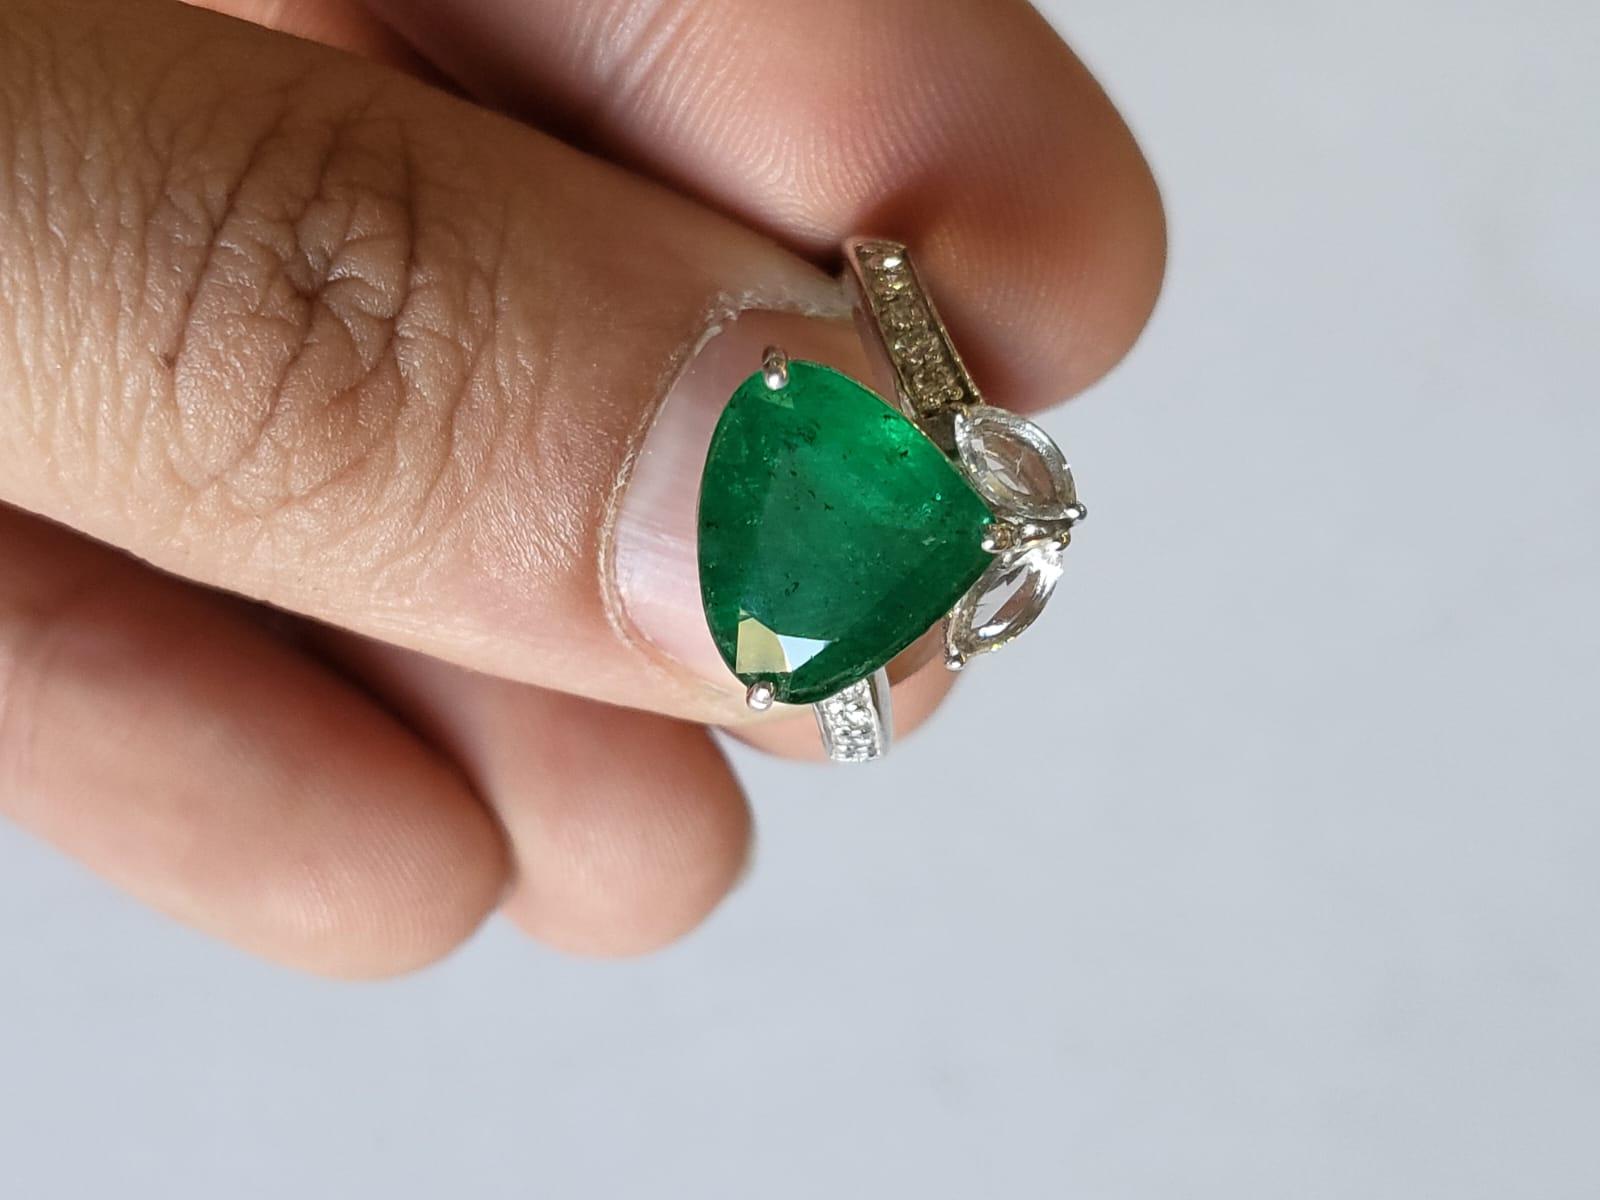 A very gorgeous and one of a kind, Emerald Engagement / Cocktail Ring set in 18K White Gold & Diamonds. The weight of the Emerald is 4.00 carats. The Emerald is completely natural without any treatment and is of Zambian origin. The combined weight